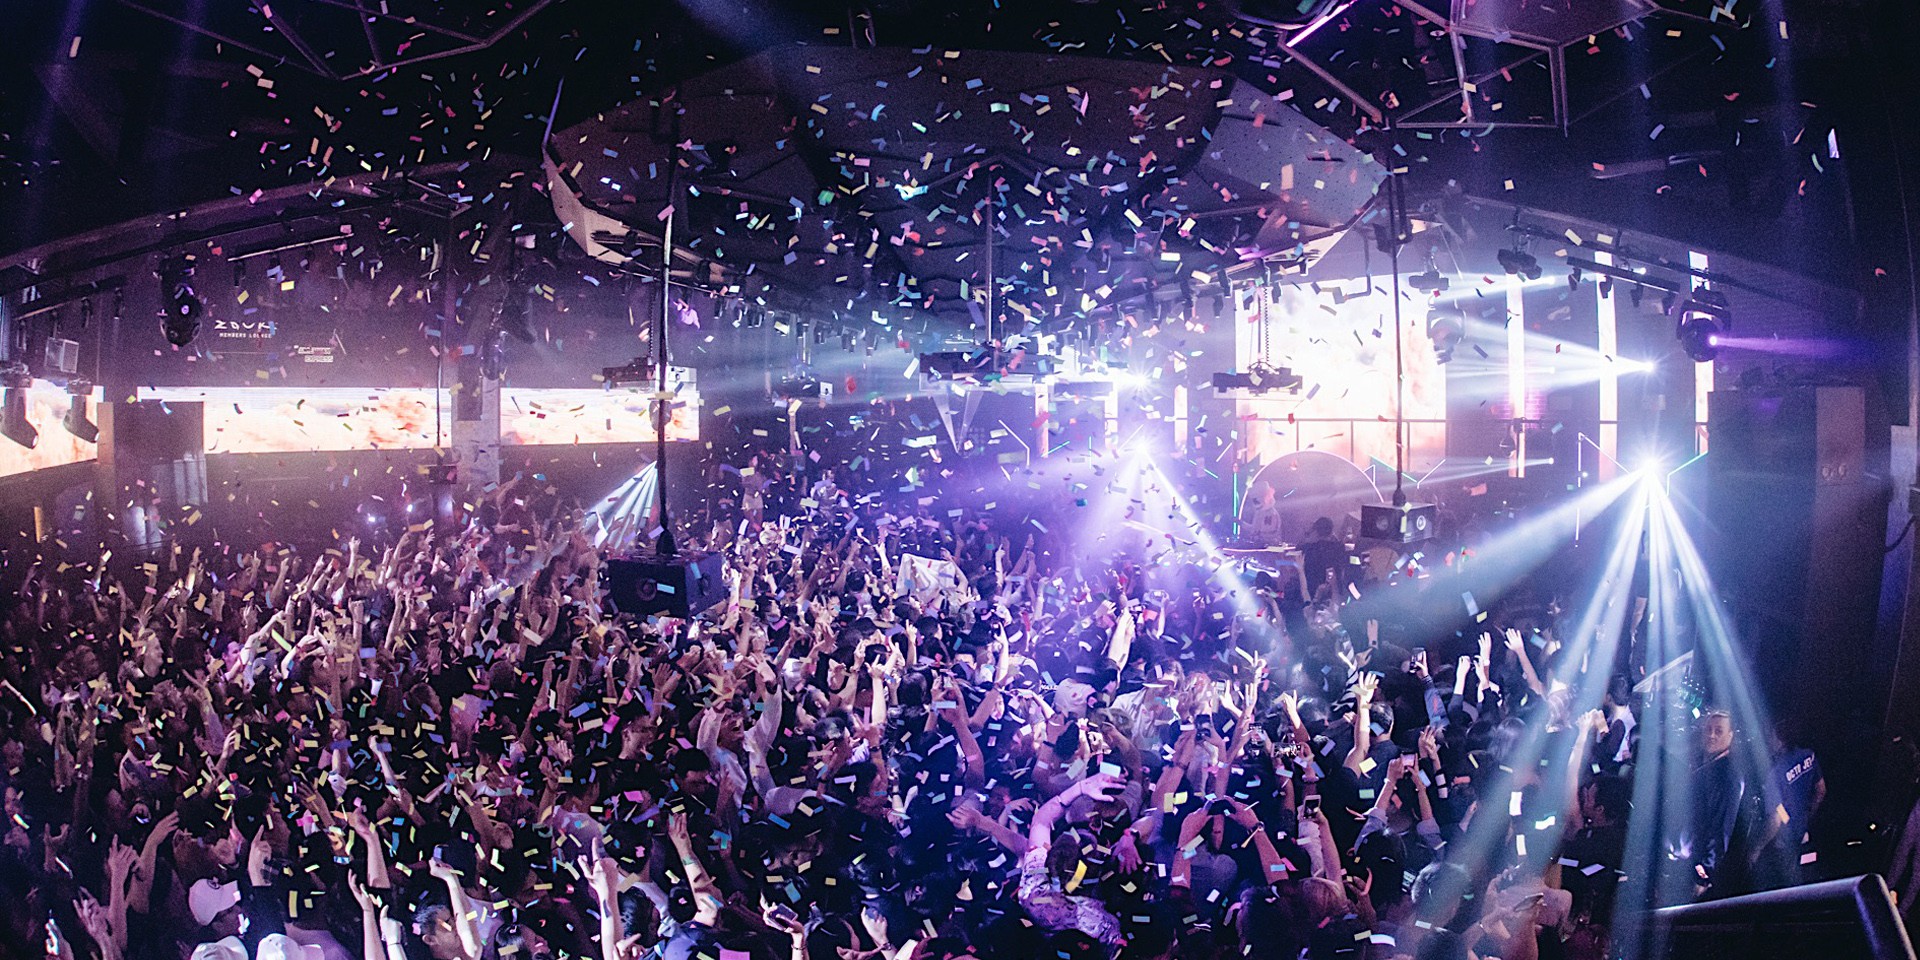 An interview with Zouk CEO Andrew Li on the club's bright, multi-faceted future